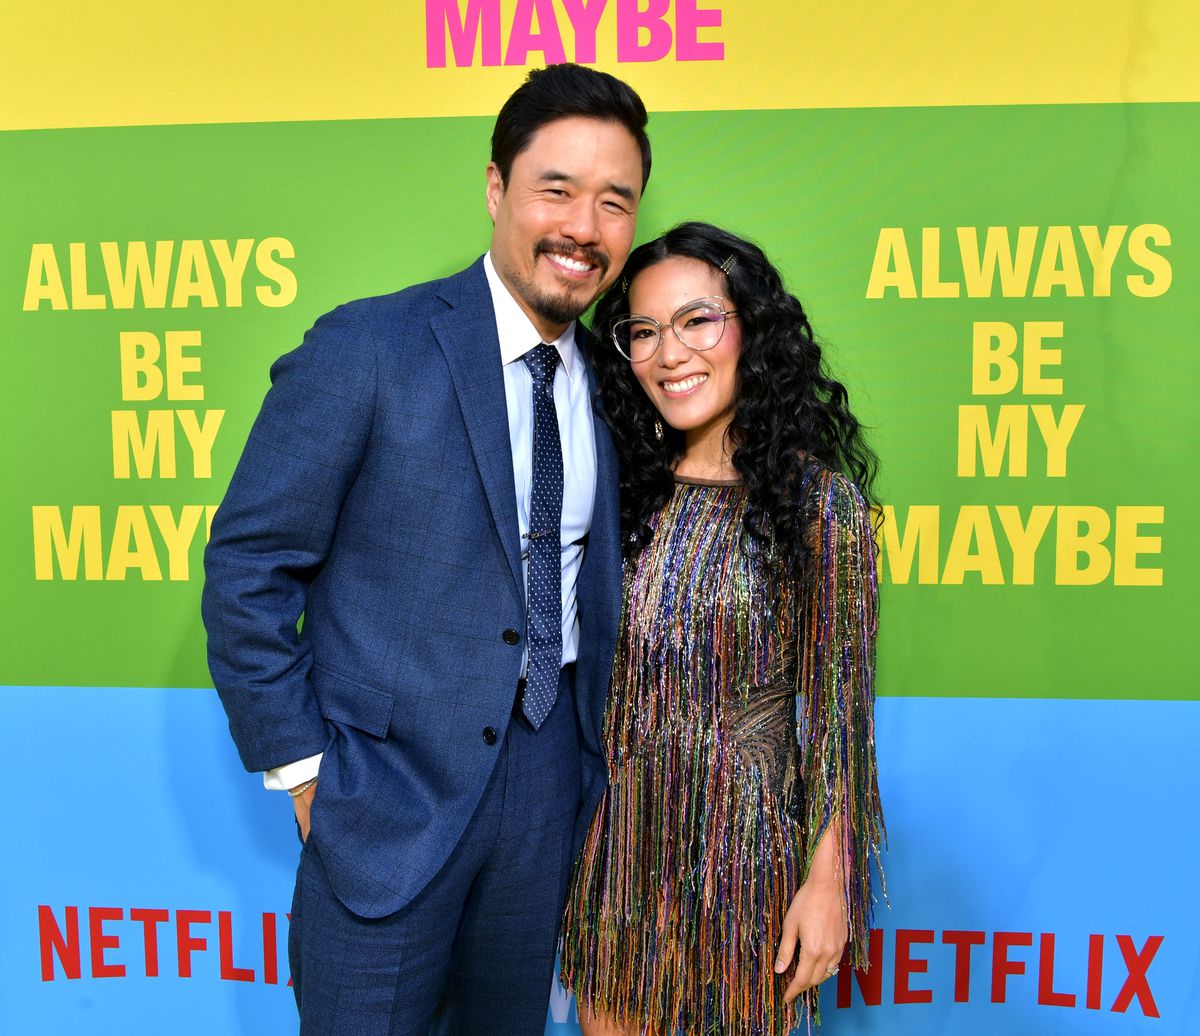 World Premiere Of Netflix’s “Always Be My Maybe”